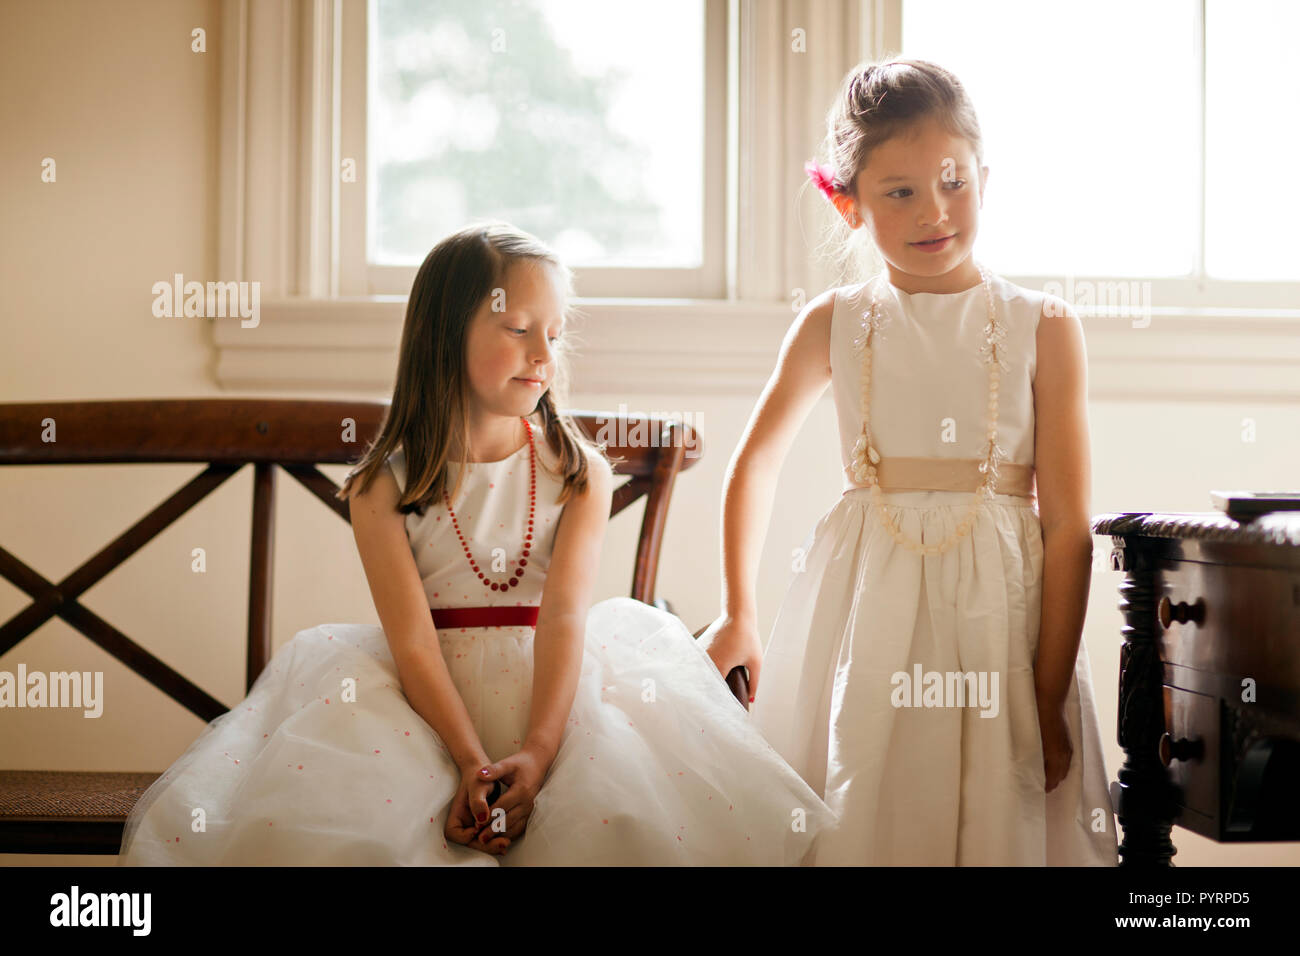 Two young girls wearing pretty images. Stock Photo